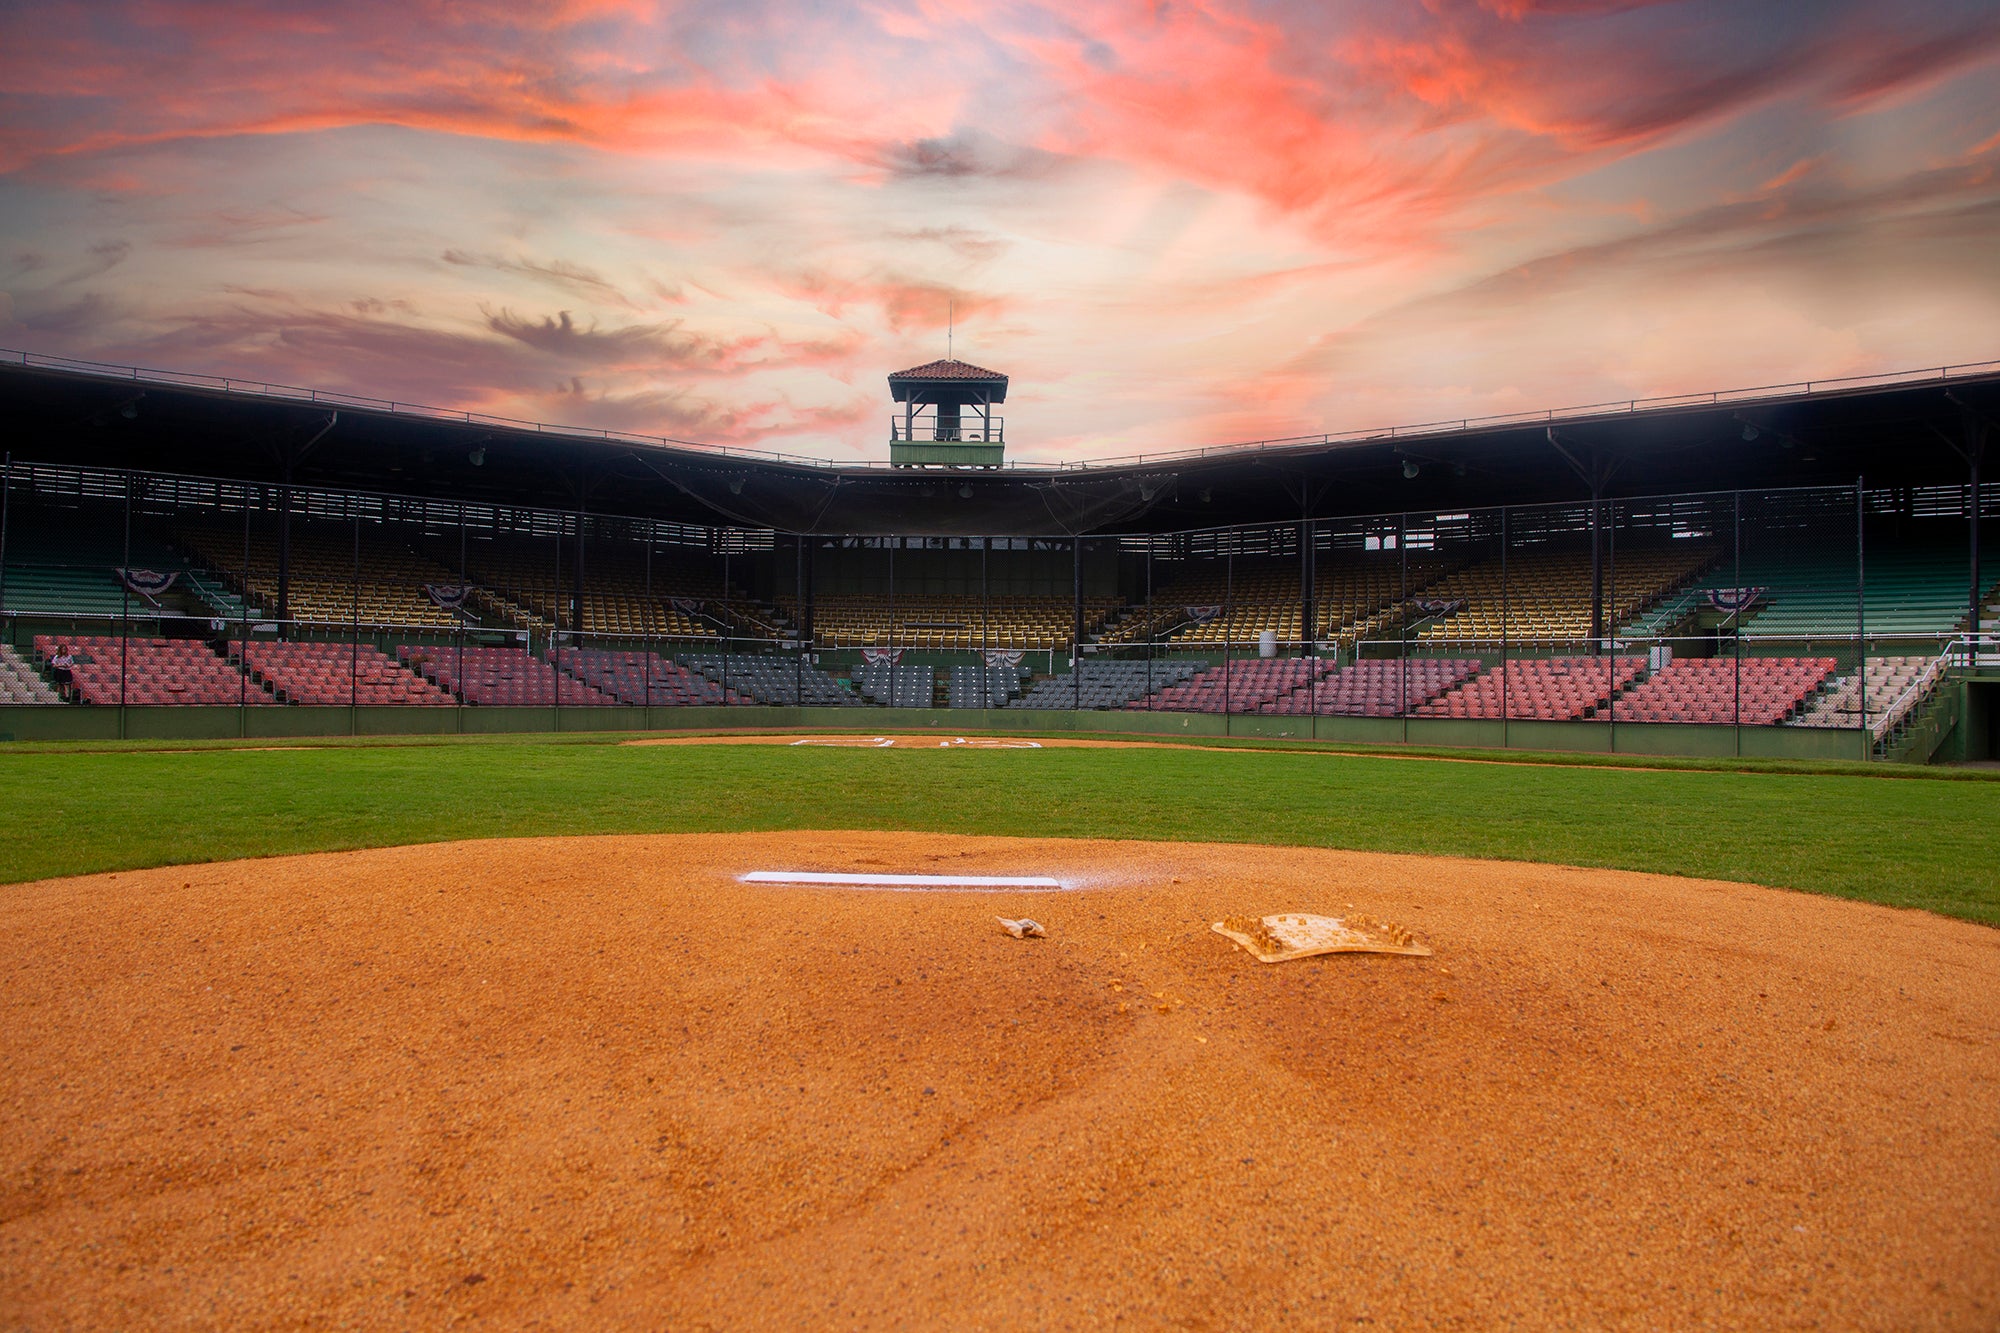 Rickwood Field features baseball’s past and present